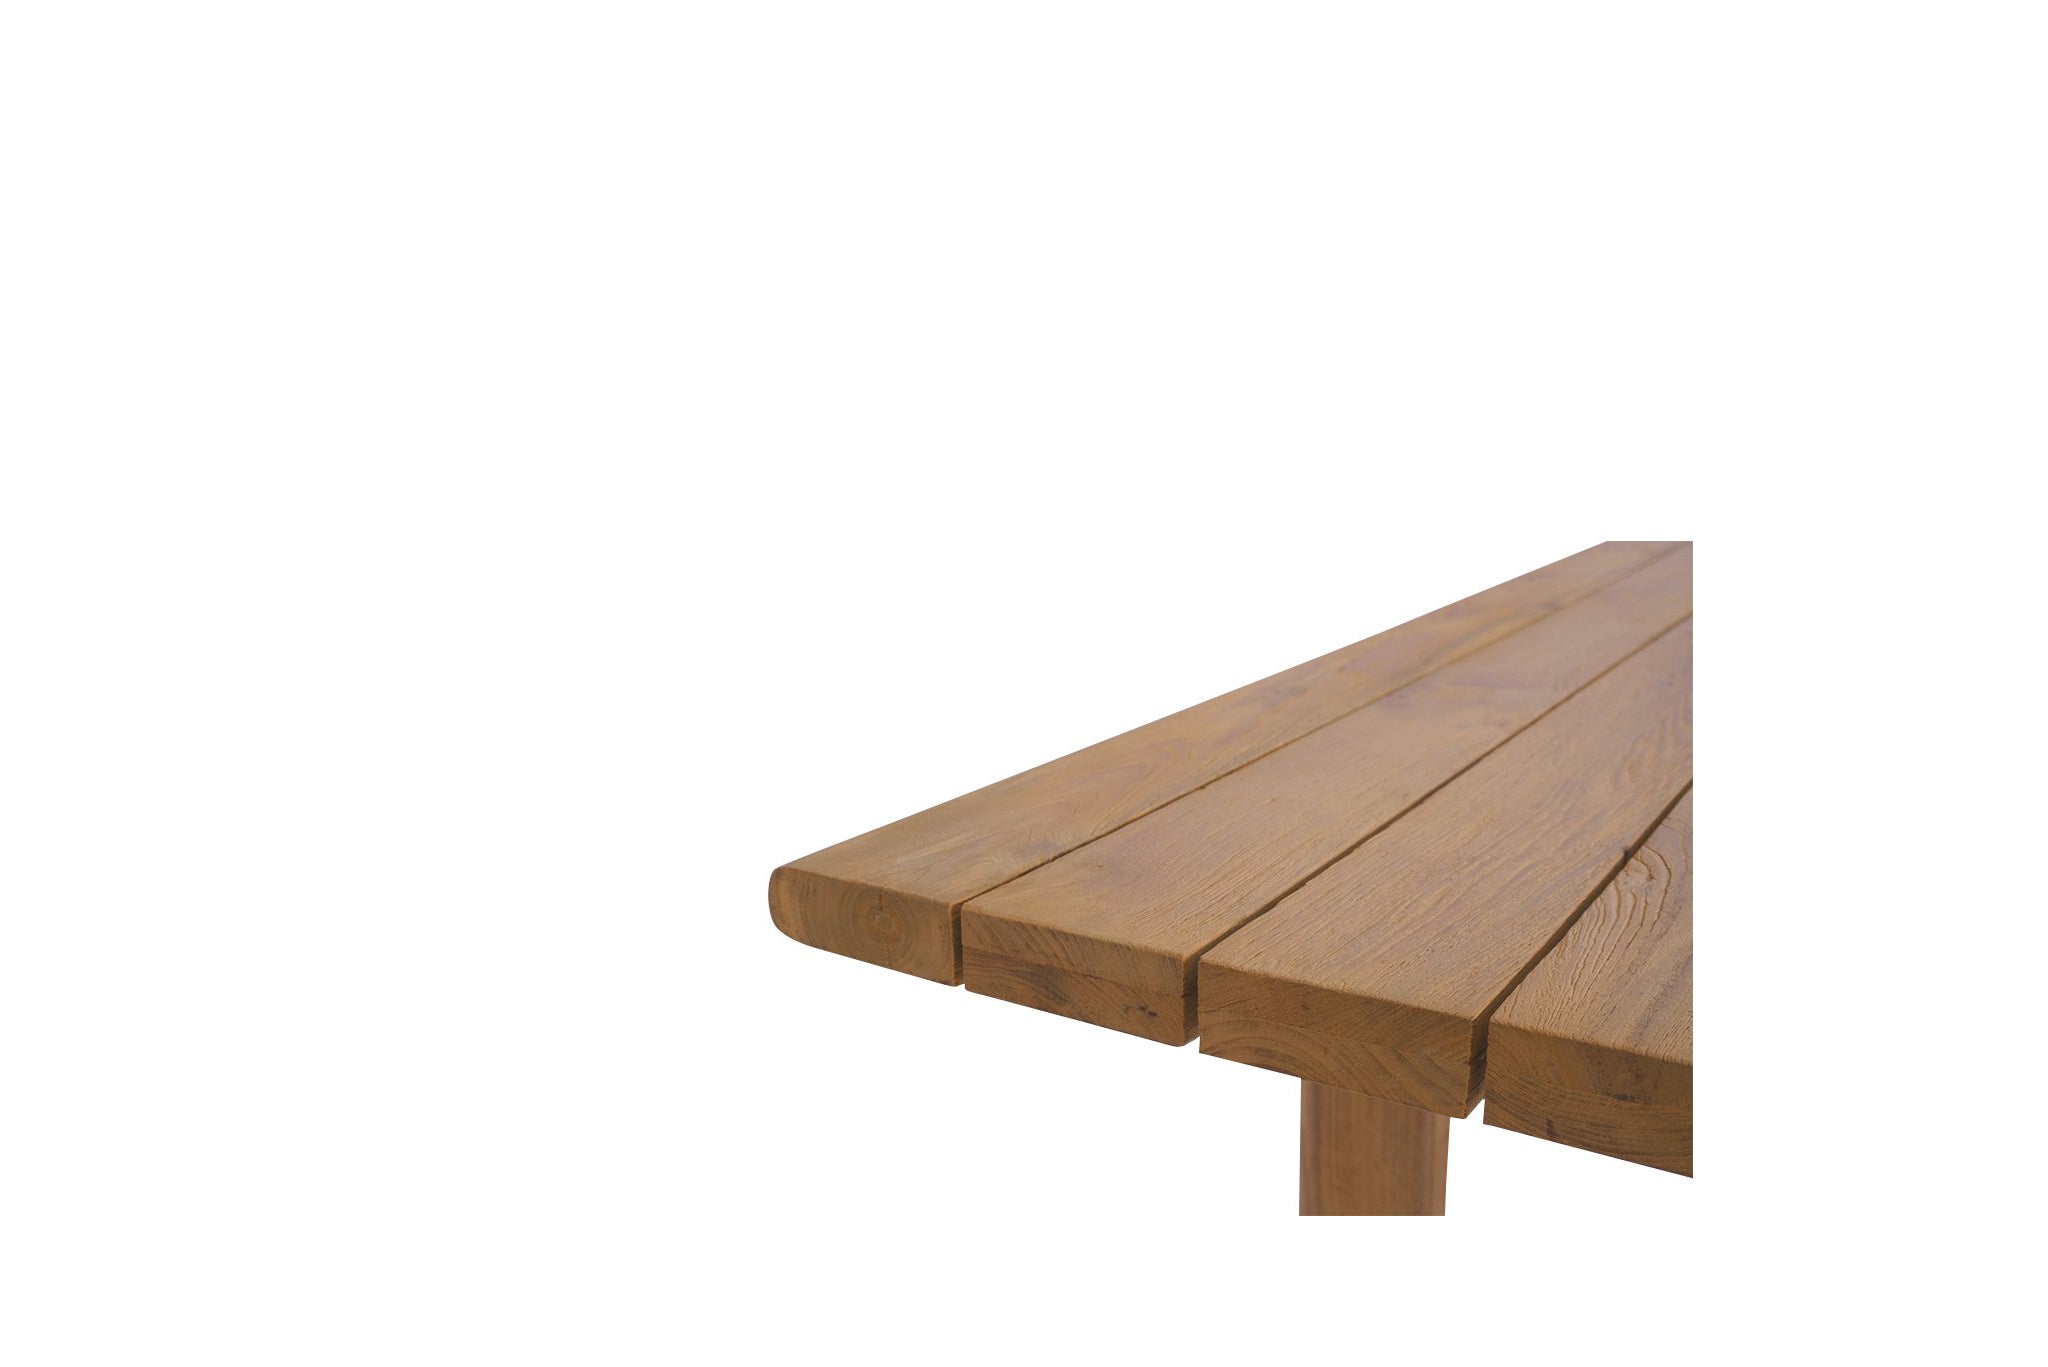 Manly Reclaimed Teak Outdoor Dining Table – 3m